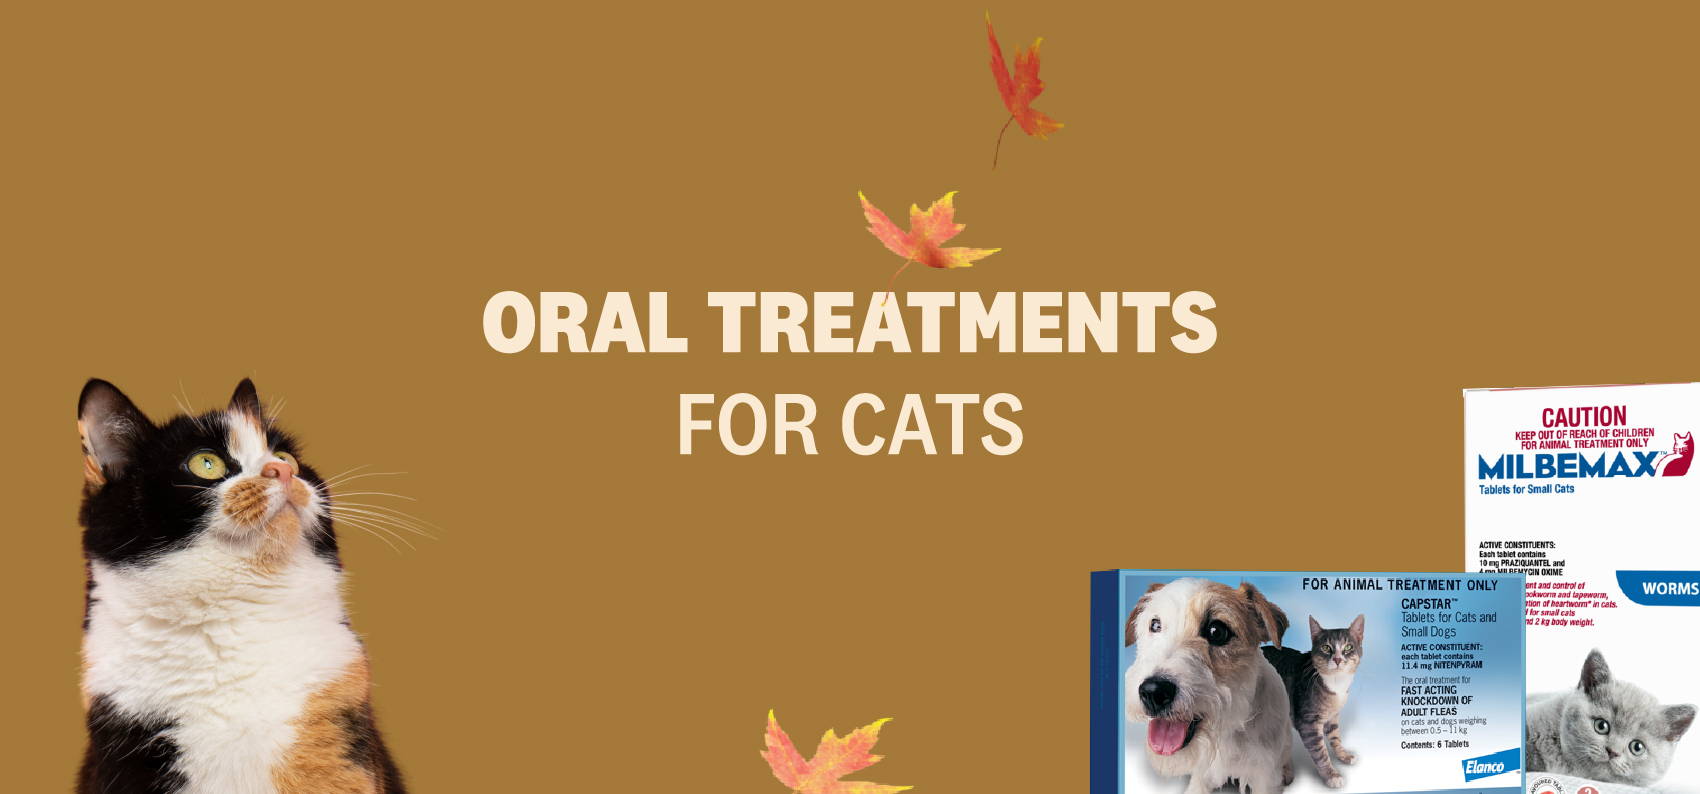 ORAL TREATMENTS FOR CATS